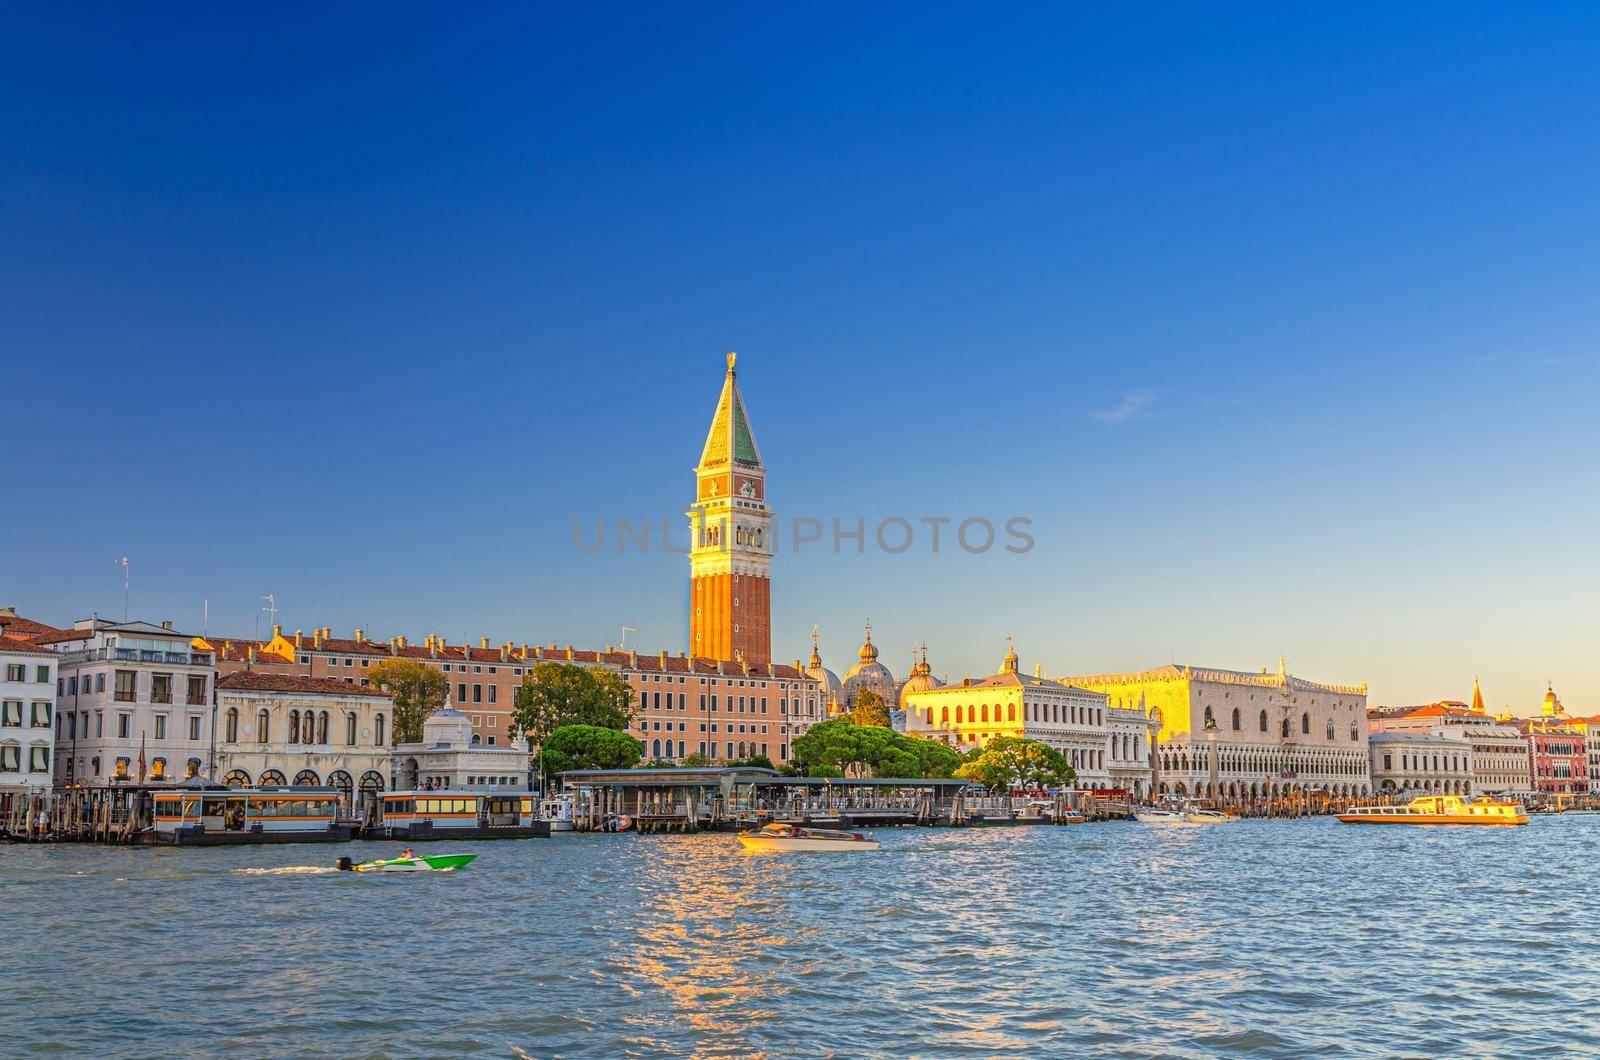 Venice cityscape with San Marco basin of Venetian lagoon water, Procuratie Vecchie, Campanile bell tower, Biblioteca Marciana Library and Doge's Palace Palazzo Ducale building, Veneto Region, Italy